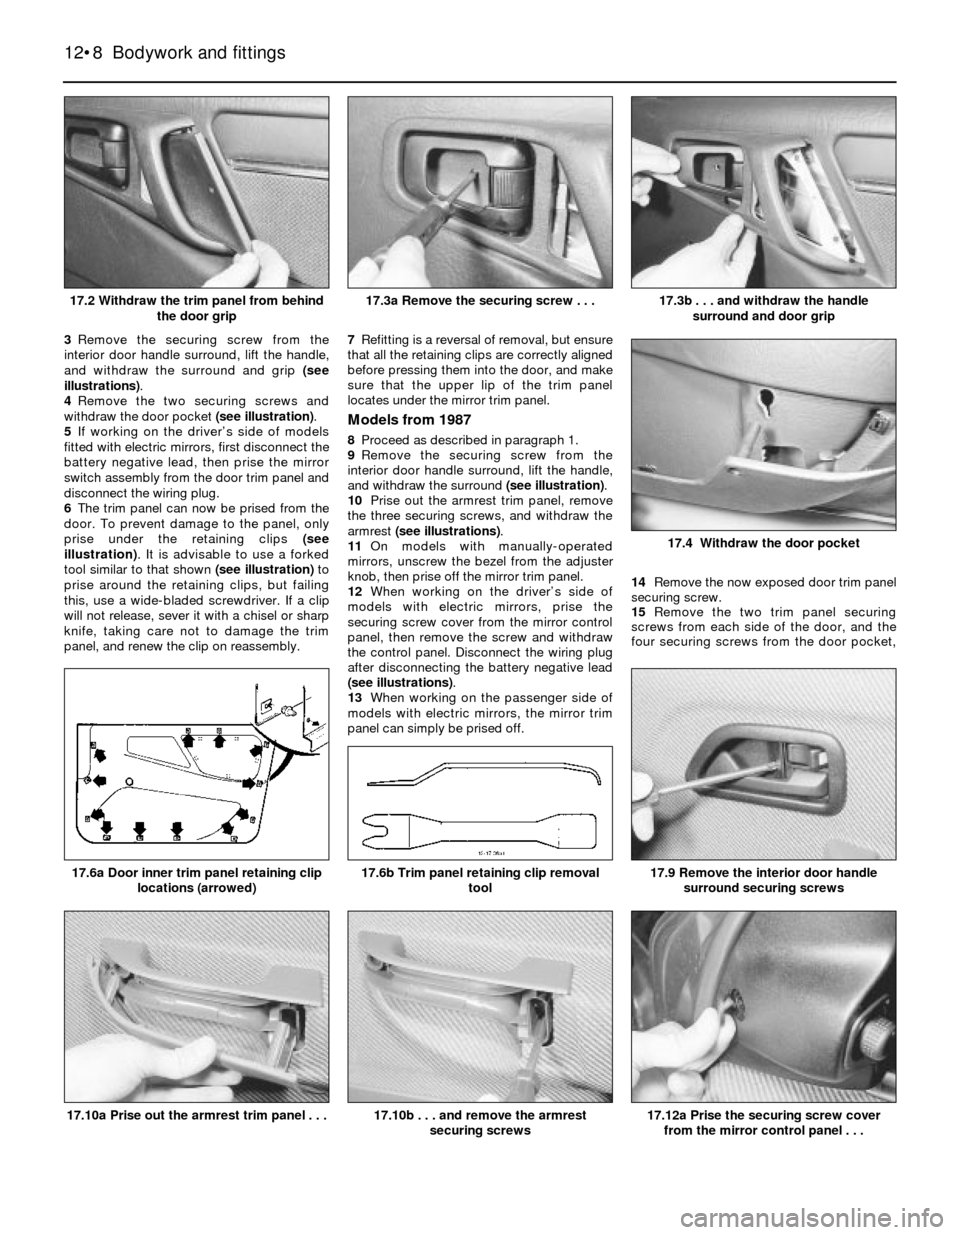 FORD SIERRA 1988 2.G Bodywork And Fittings Workshop Manual 3Remove the securing screw from the
interior door handle surround, lift the handle,
and withdraw the surround and grip (see
illustrations).
4Remove the two securing screws and
withdraw the door pocket